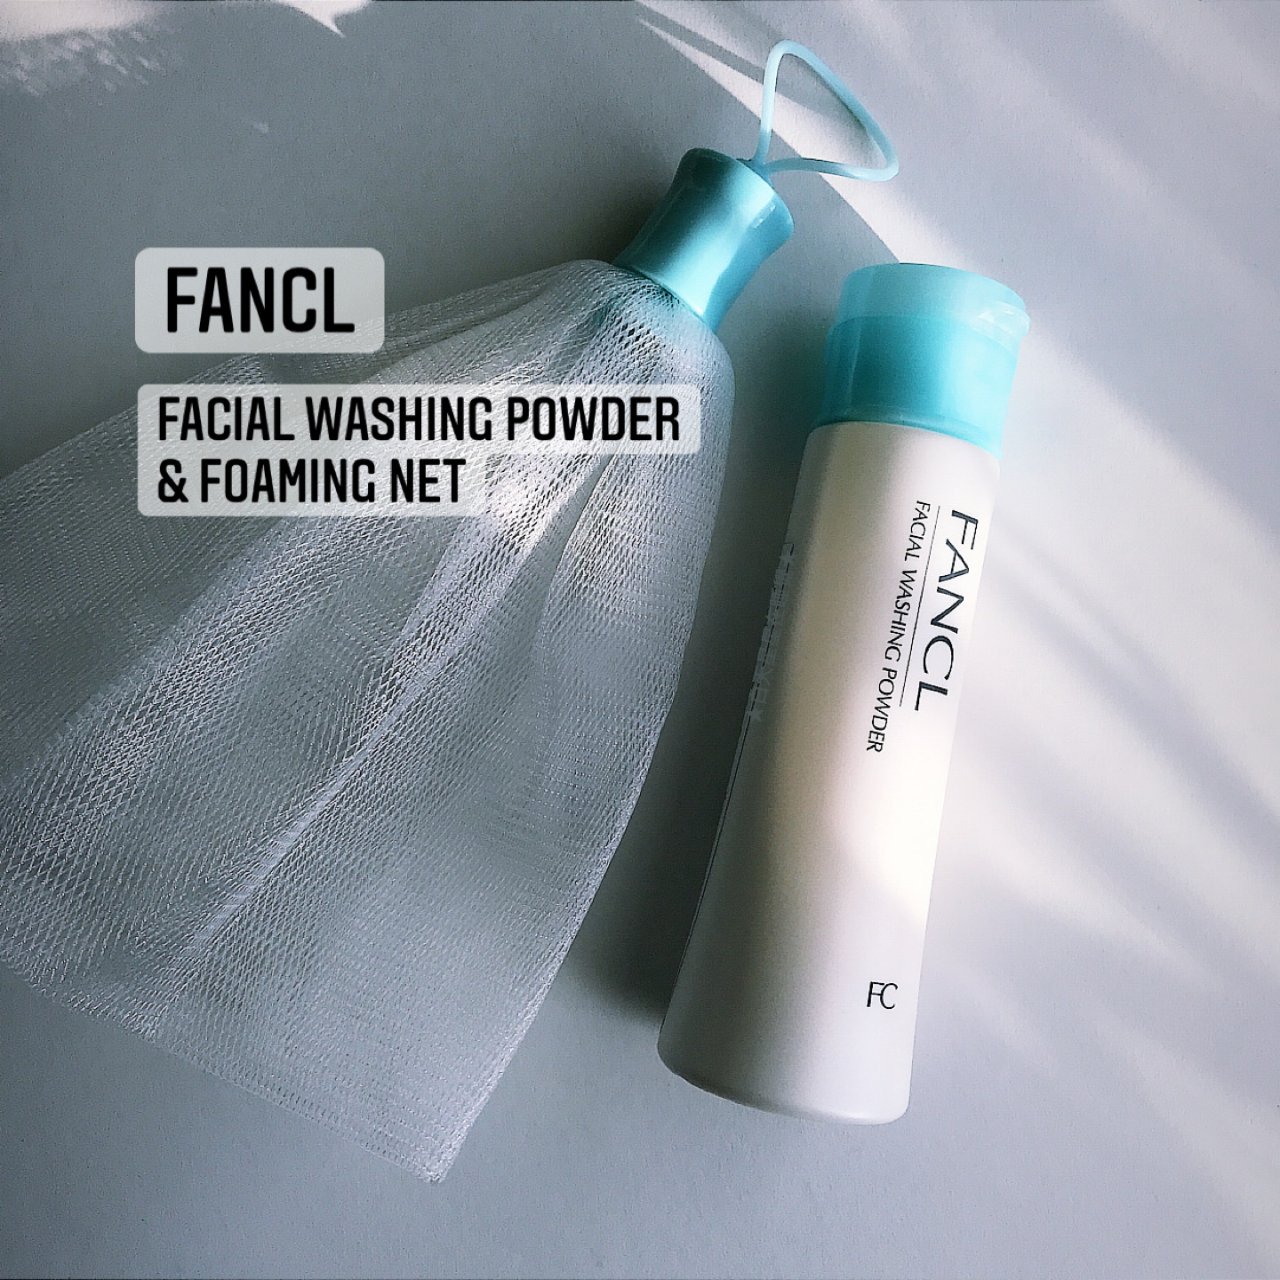 FANCL Facial Cleansing Powder & Foaming Net- 100% Preservative Free, Clean Skincare for Sensitive Skin [US Exclusive Edition]: Beauty,Fancl 芳珂